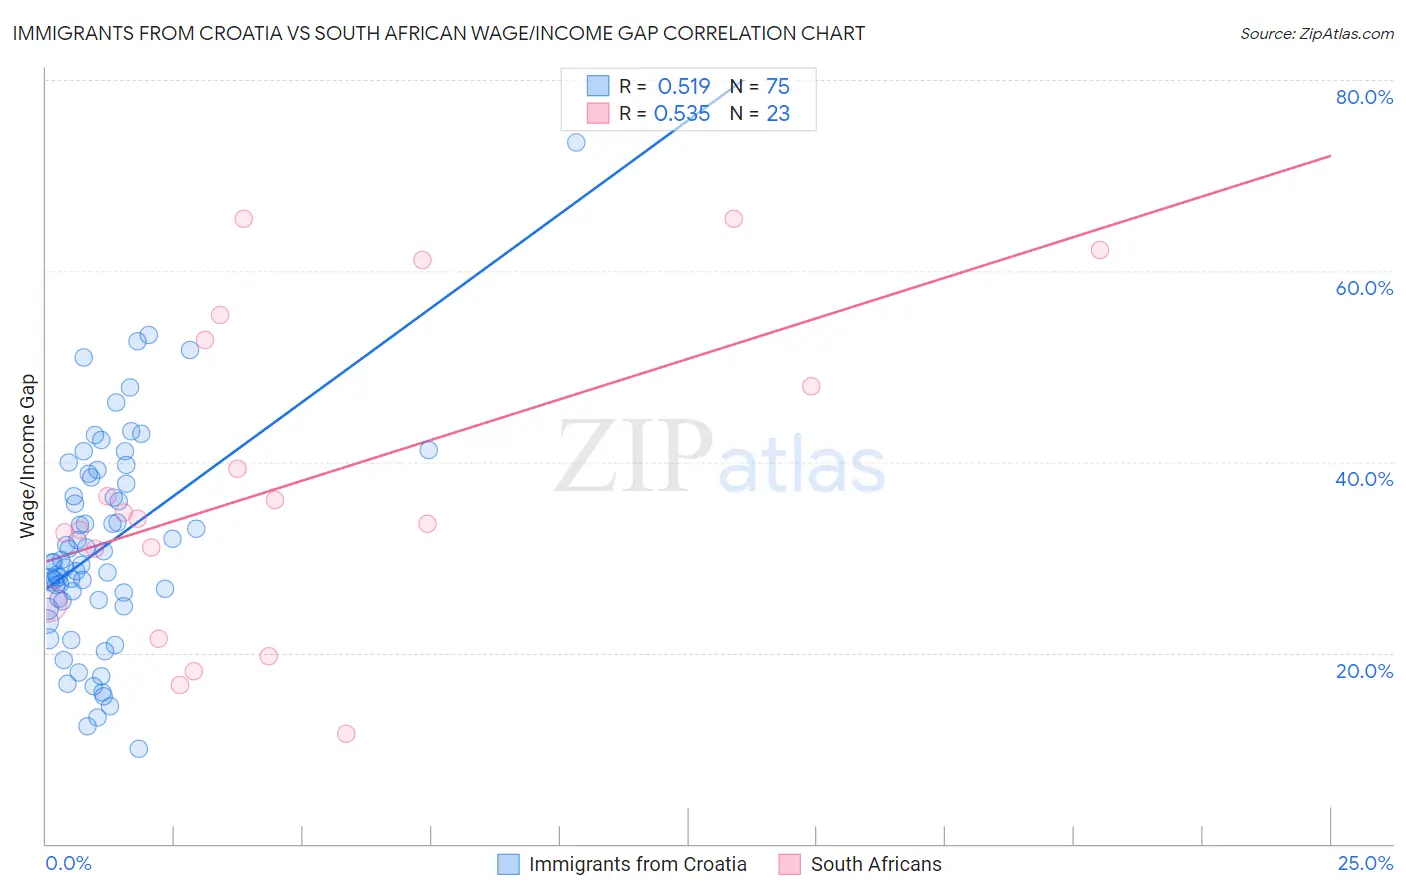 Immigrants from Croatia vs South African Wage/Income Gap